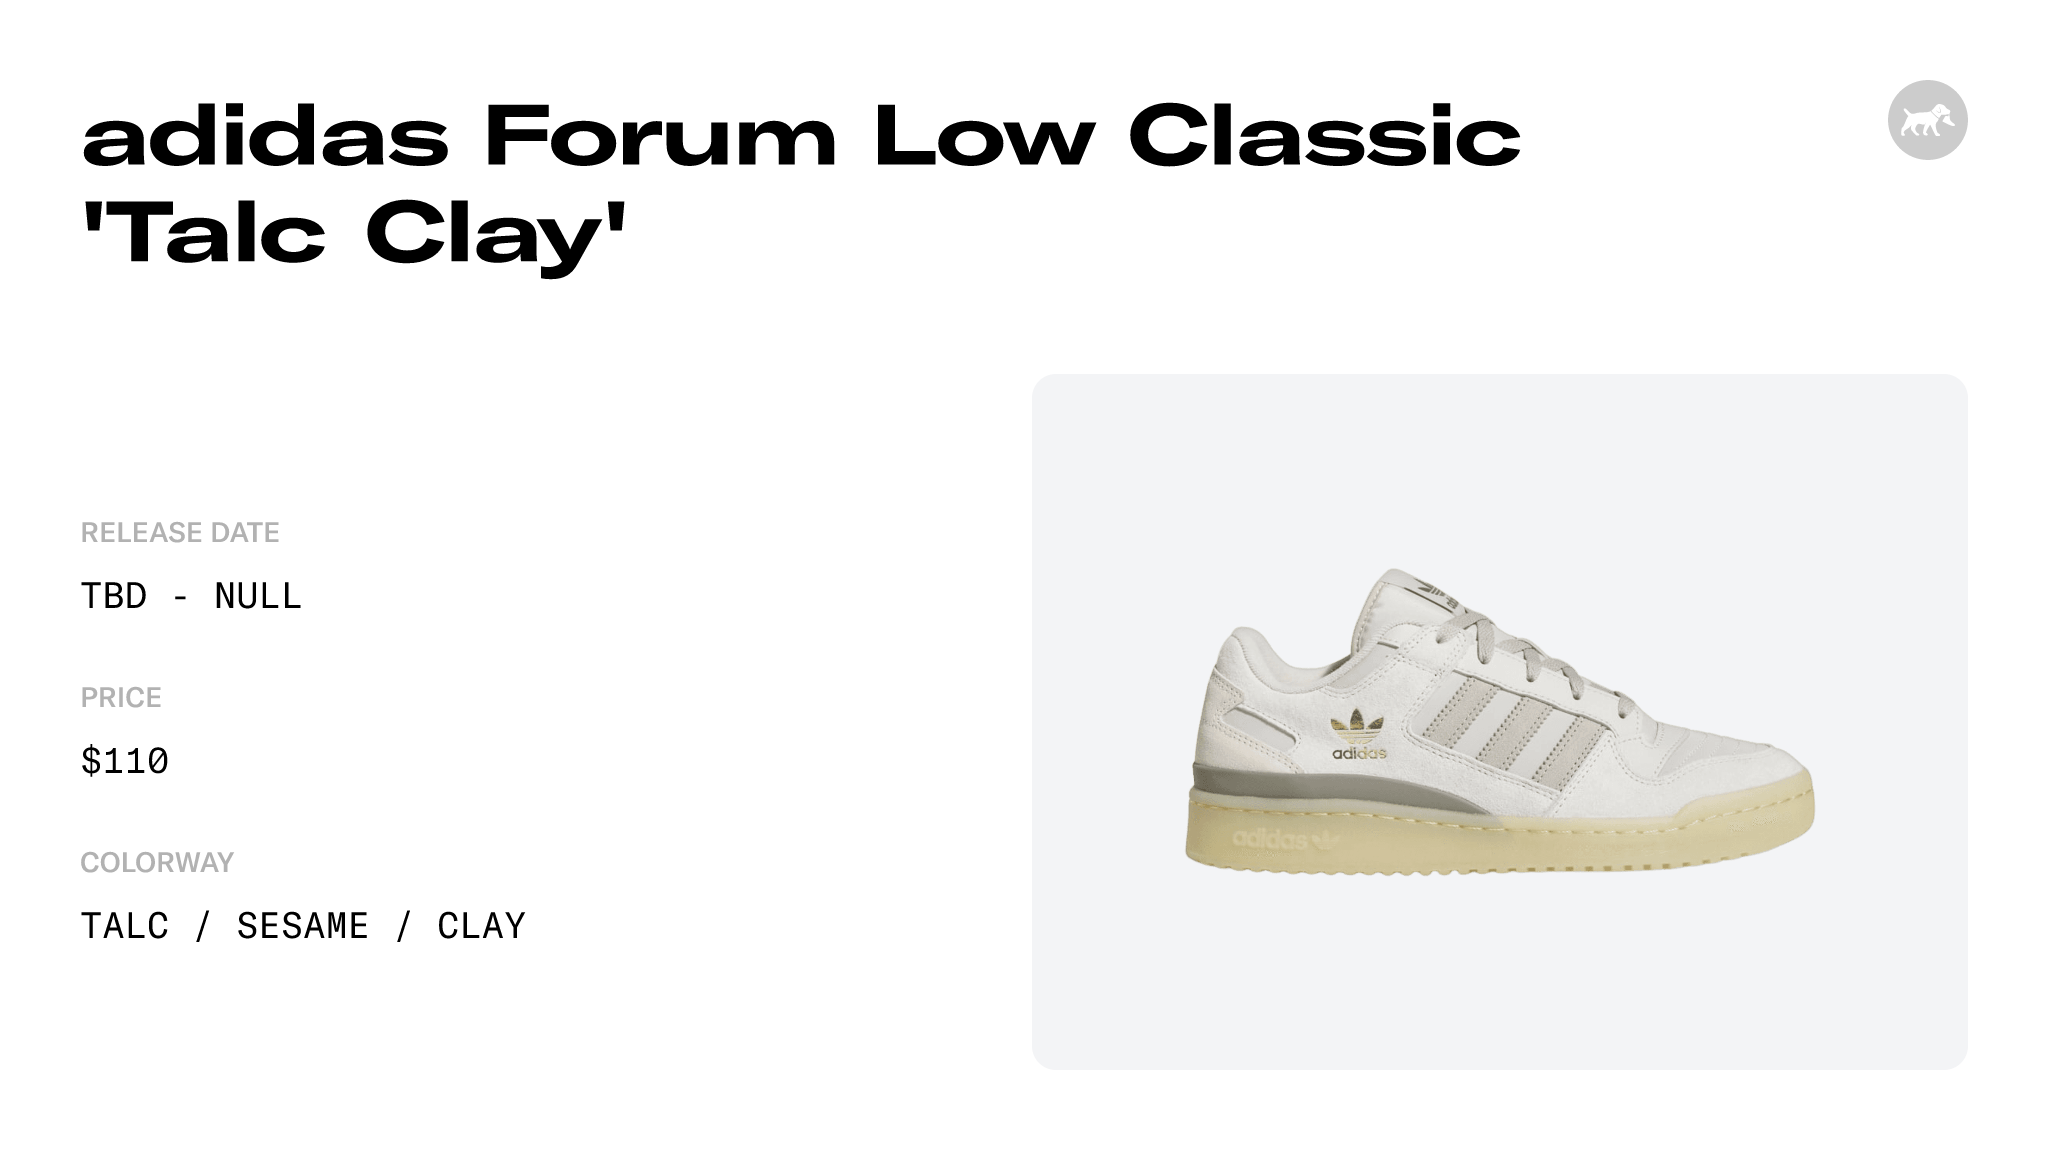 adidas Forum Low Classic 'Talc Clay' - HQ7096 Raffles and Release Date